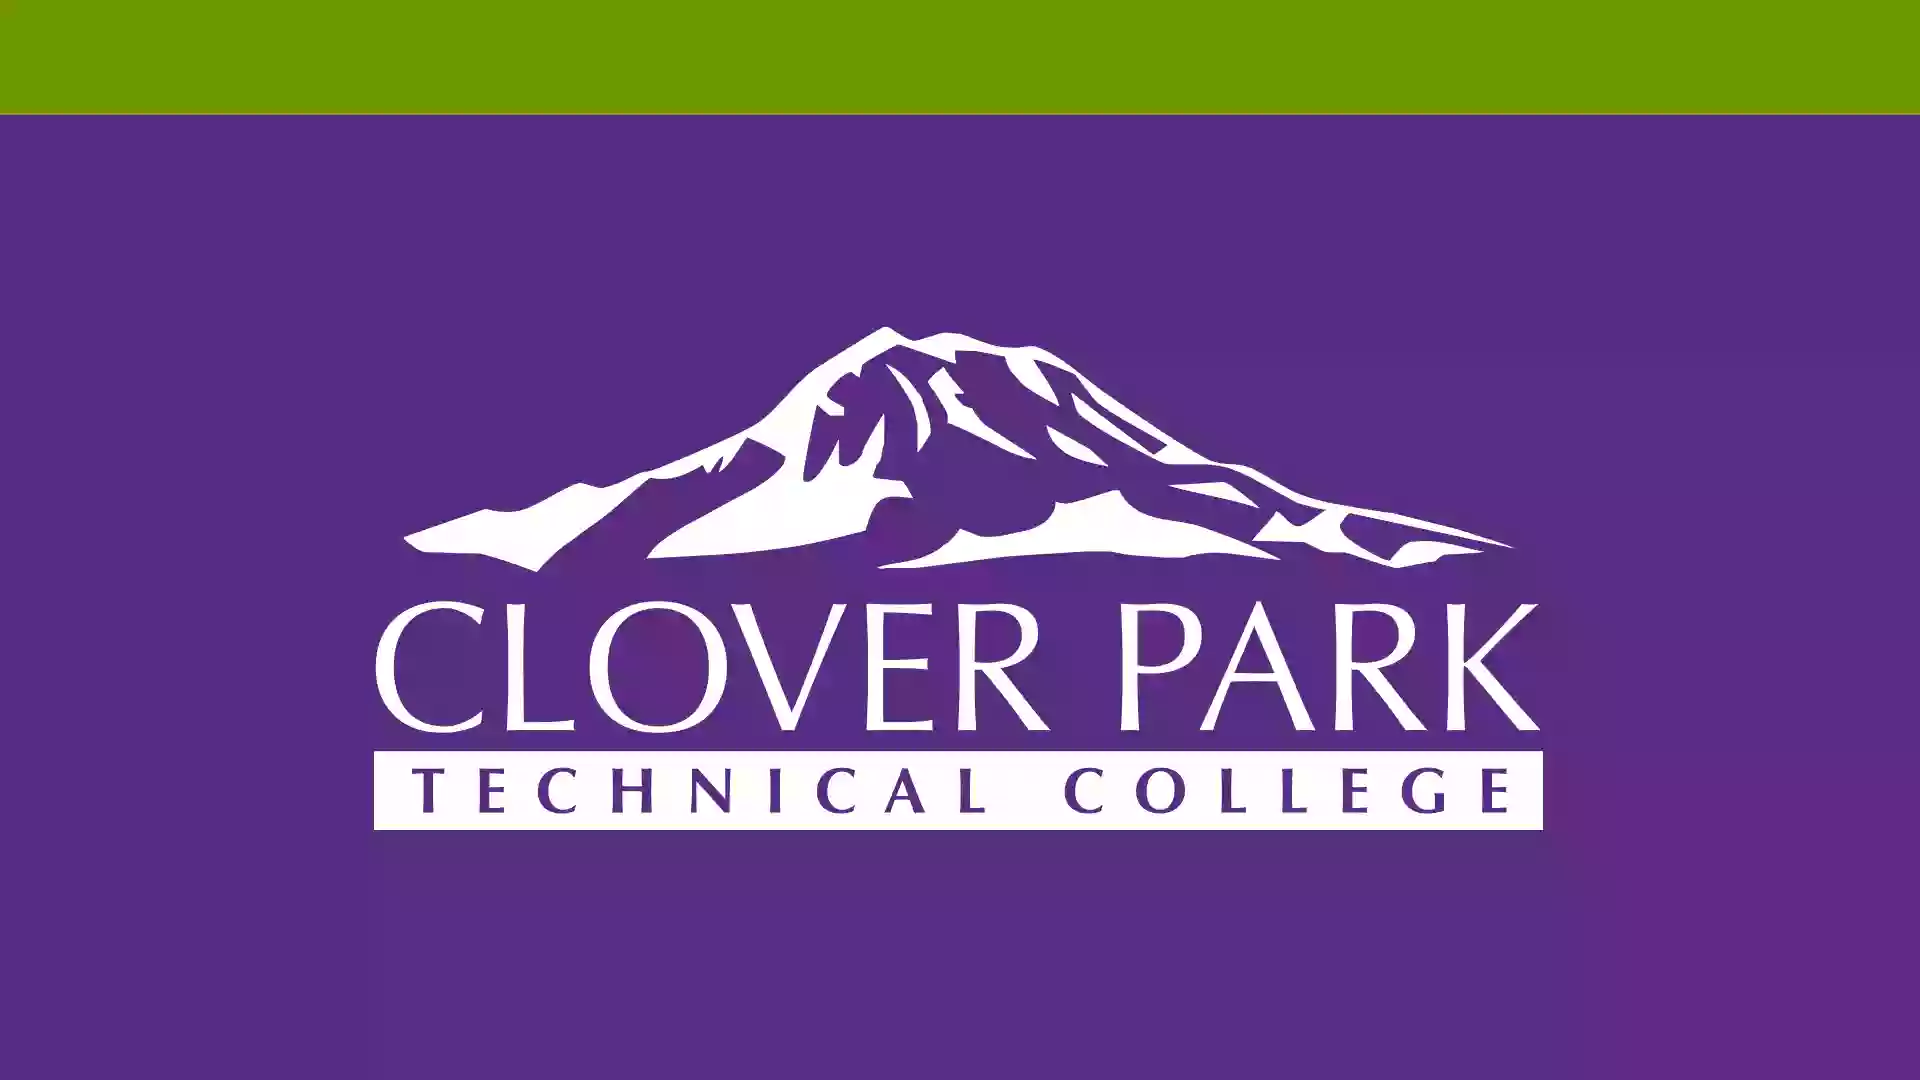 Clover Park Technical College | Building 24 | Manufacturing Engineering Technologies (MET)